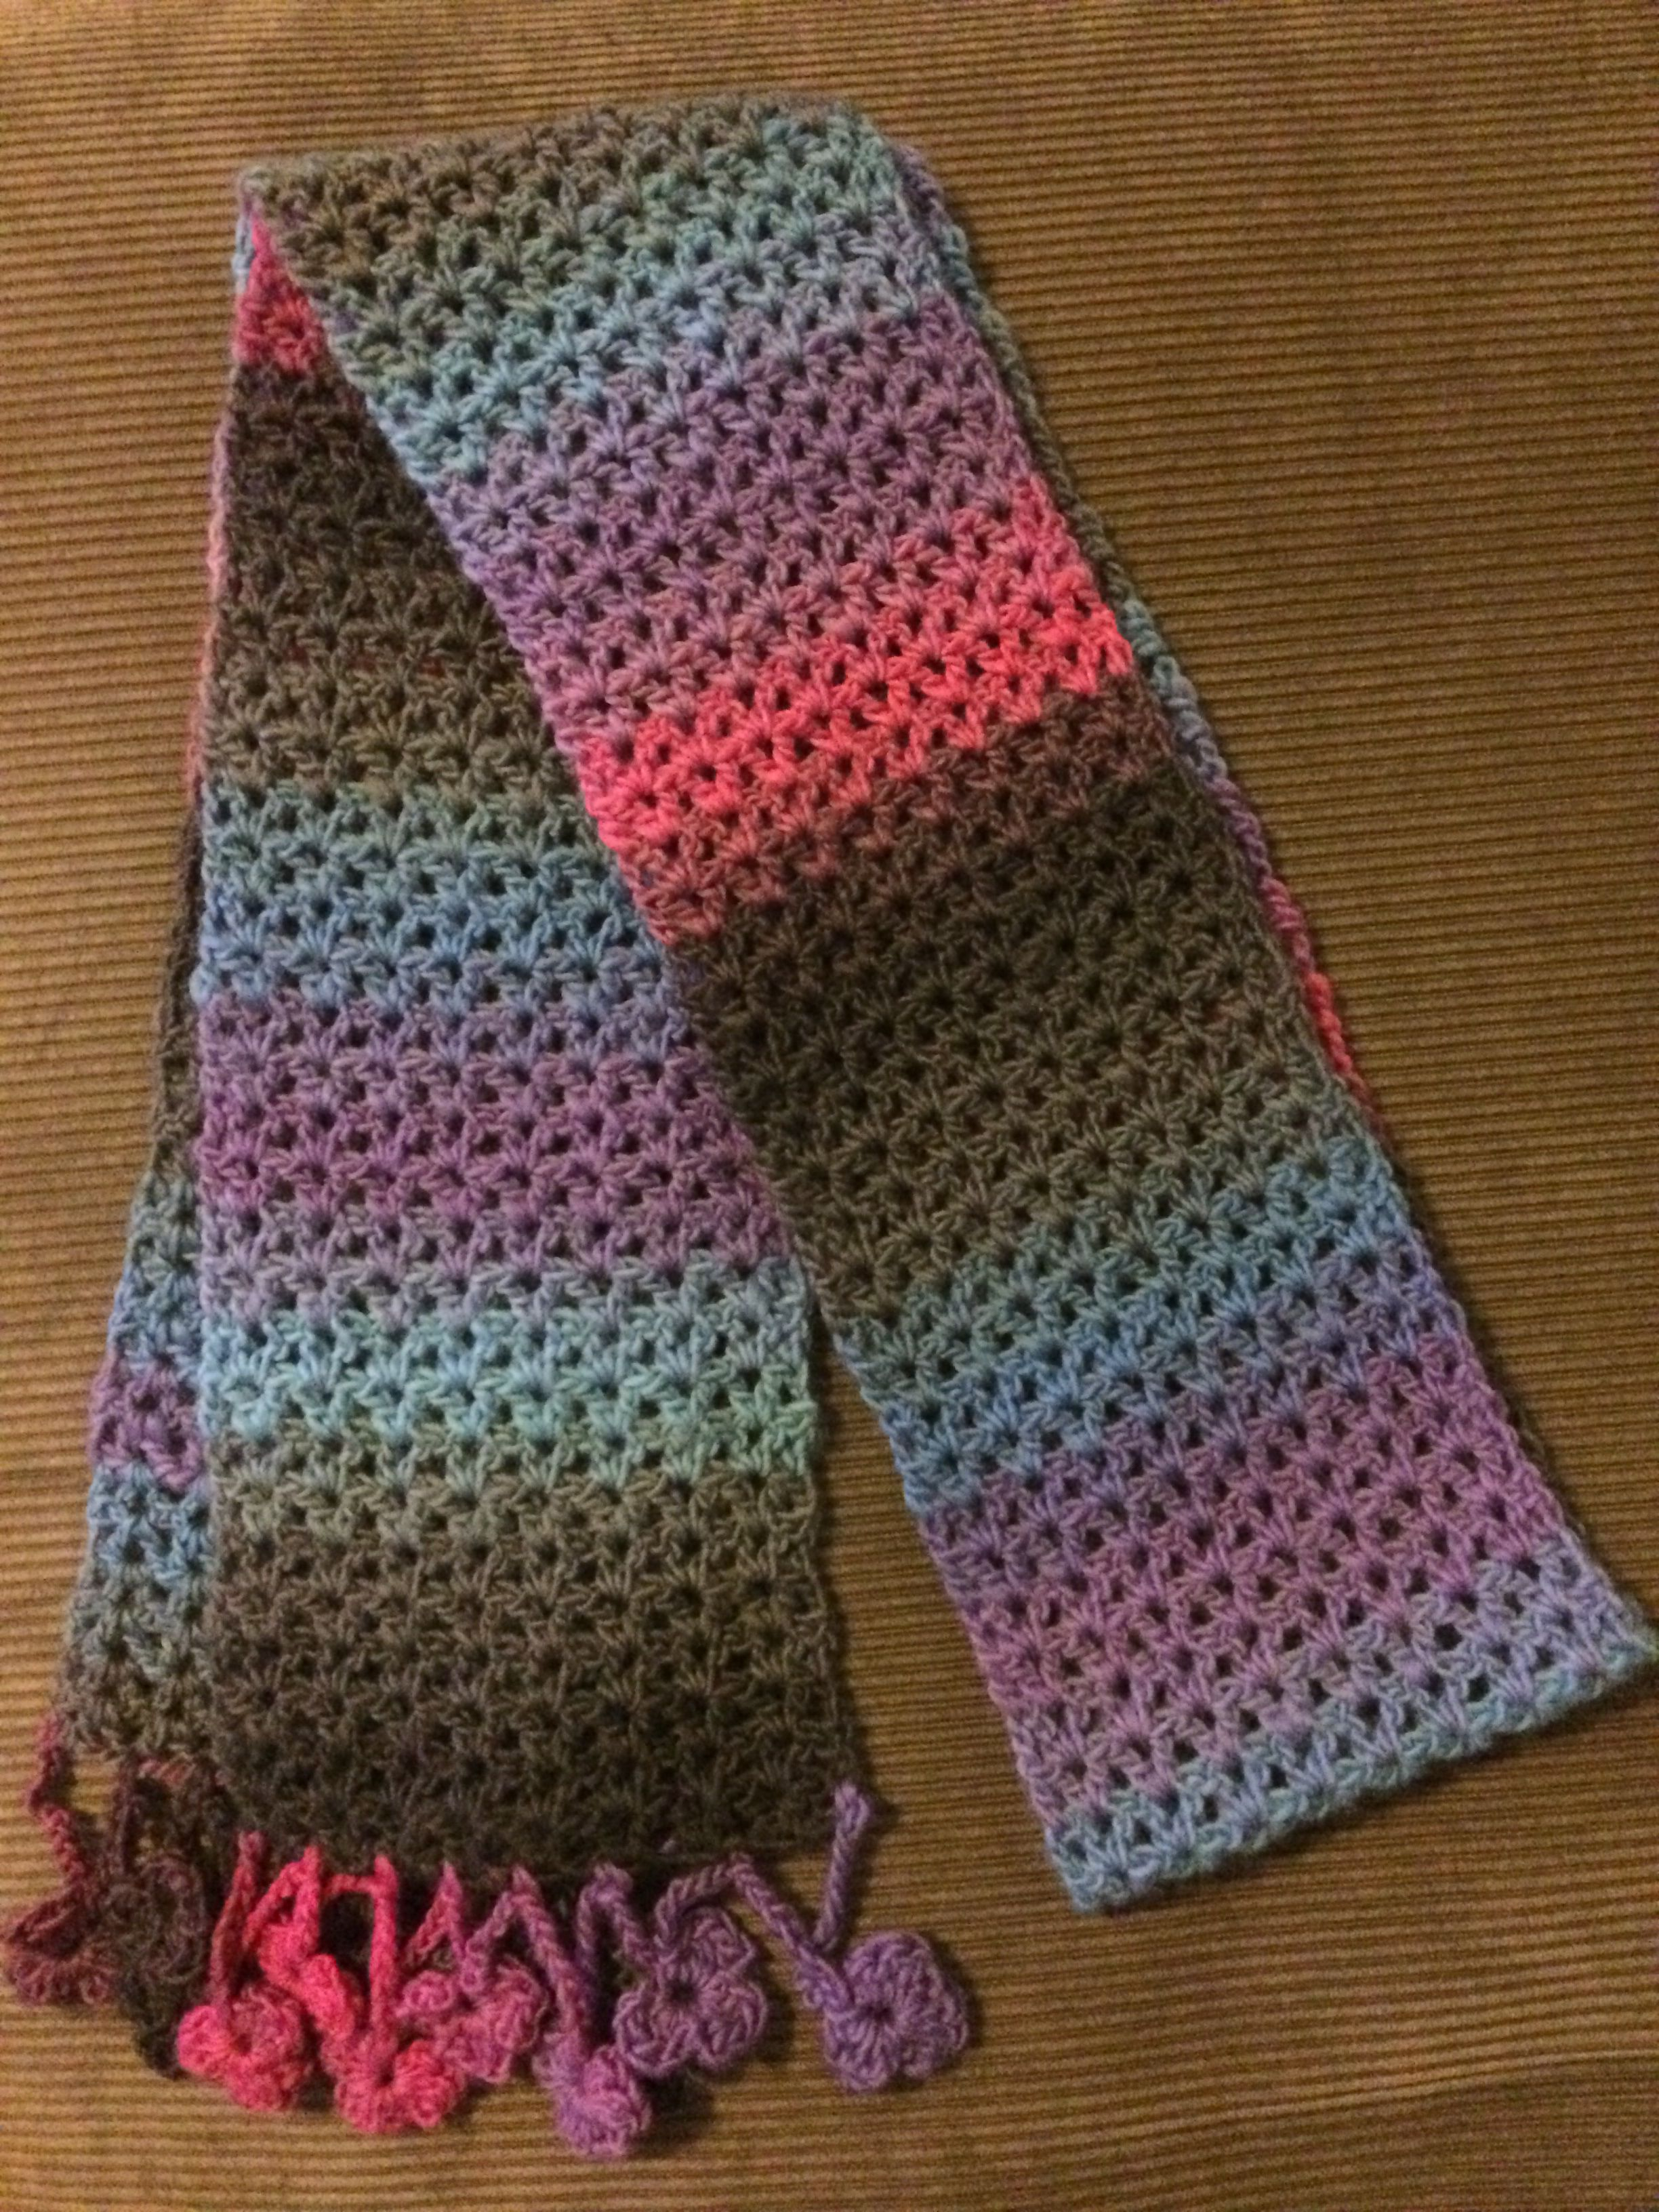 Quick And Easy Crochet Patterns Free Crochet Patterngelato Infinity Scarf Give Them The Hook